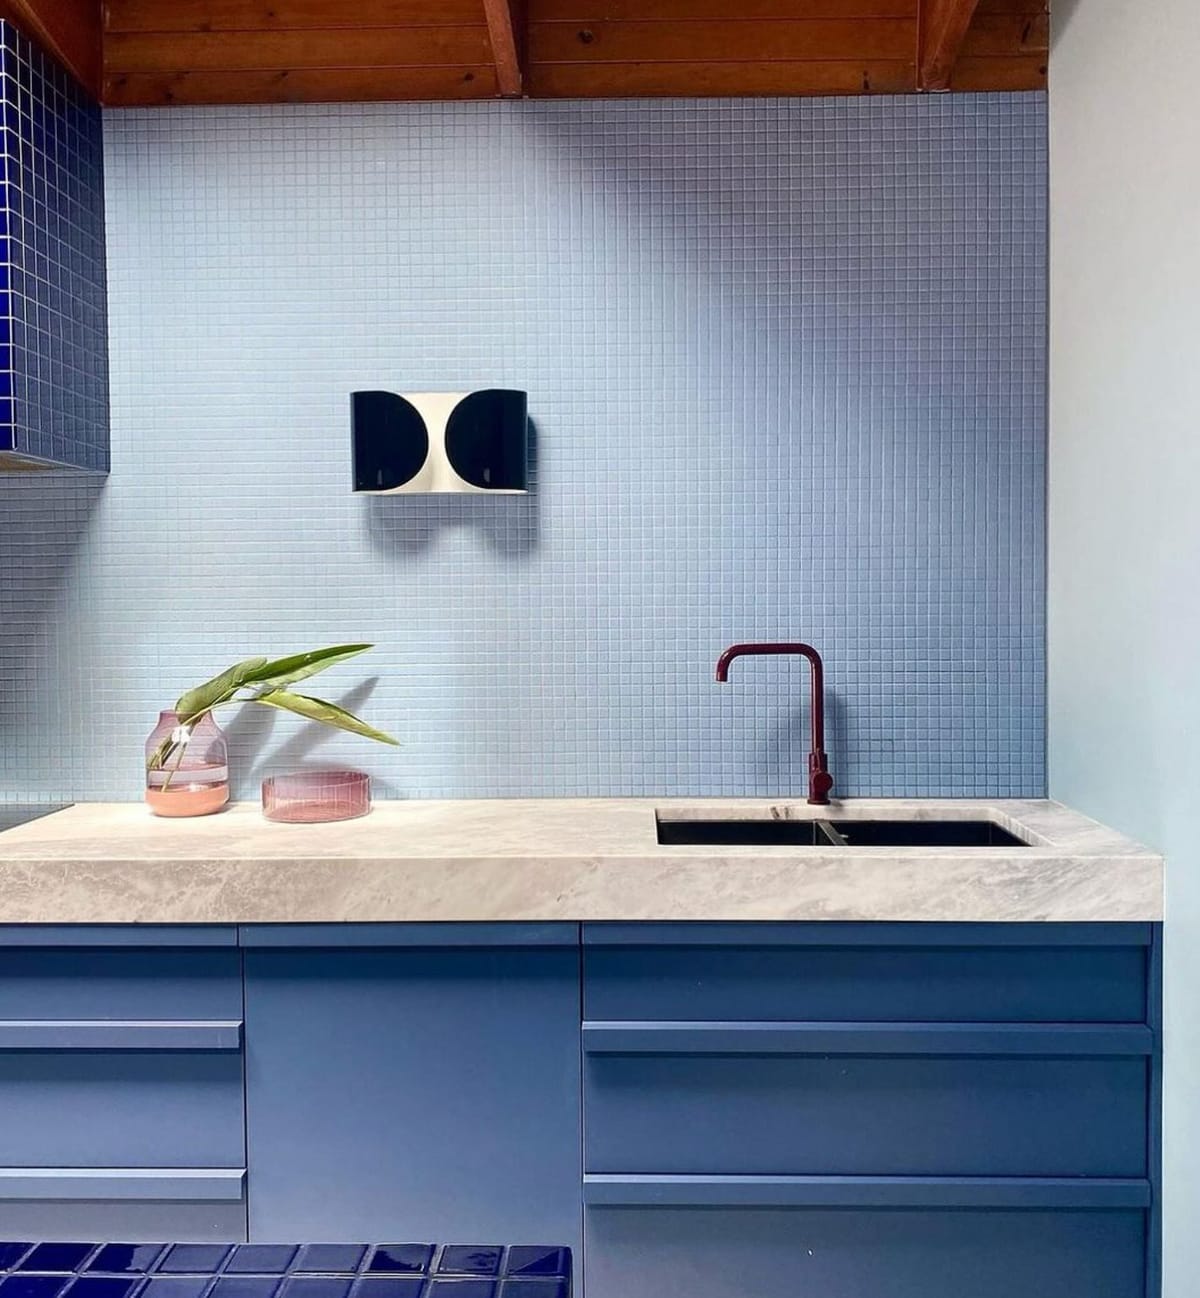 Par Tap mixer in a nicely styled kitchen with blue tiles, blue joinery and a white marble bench top